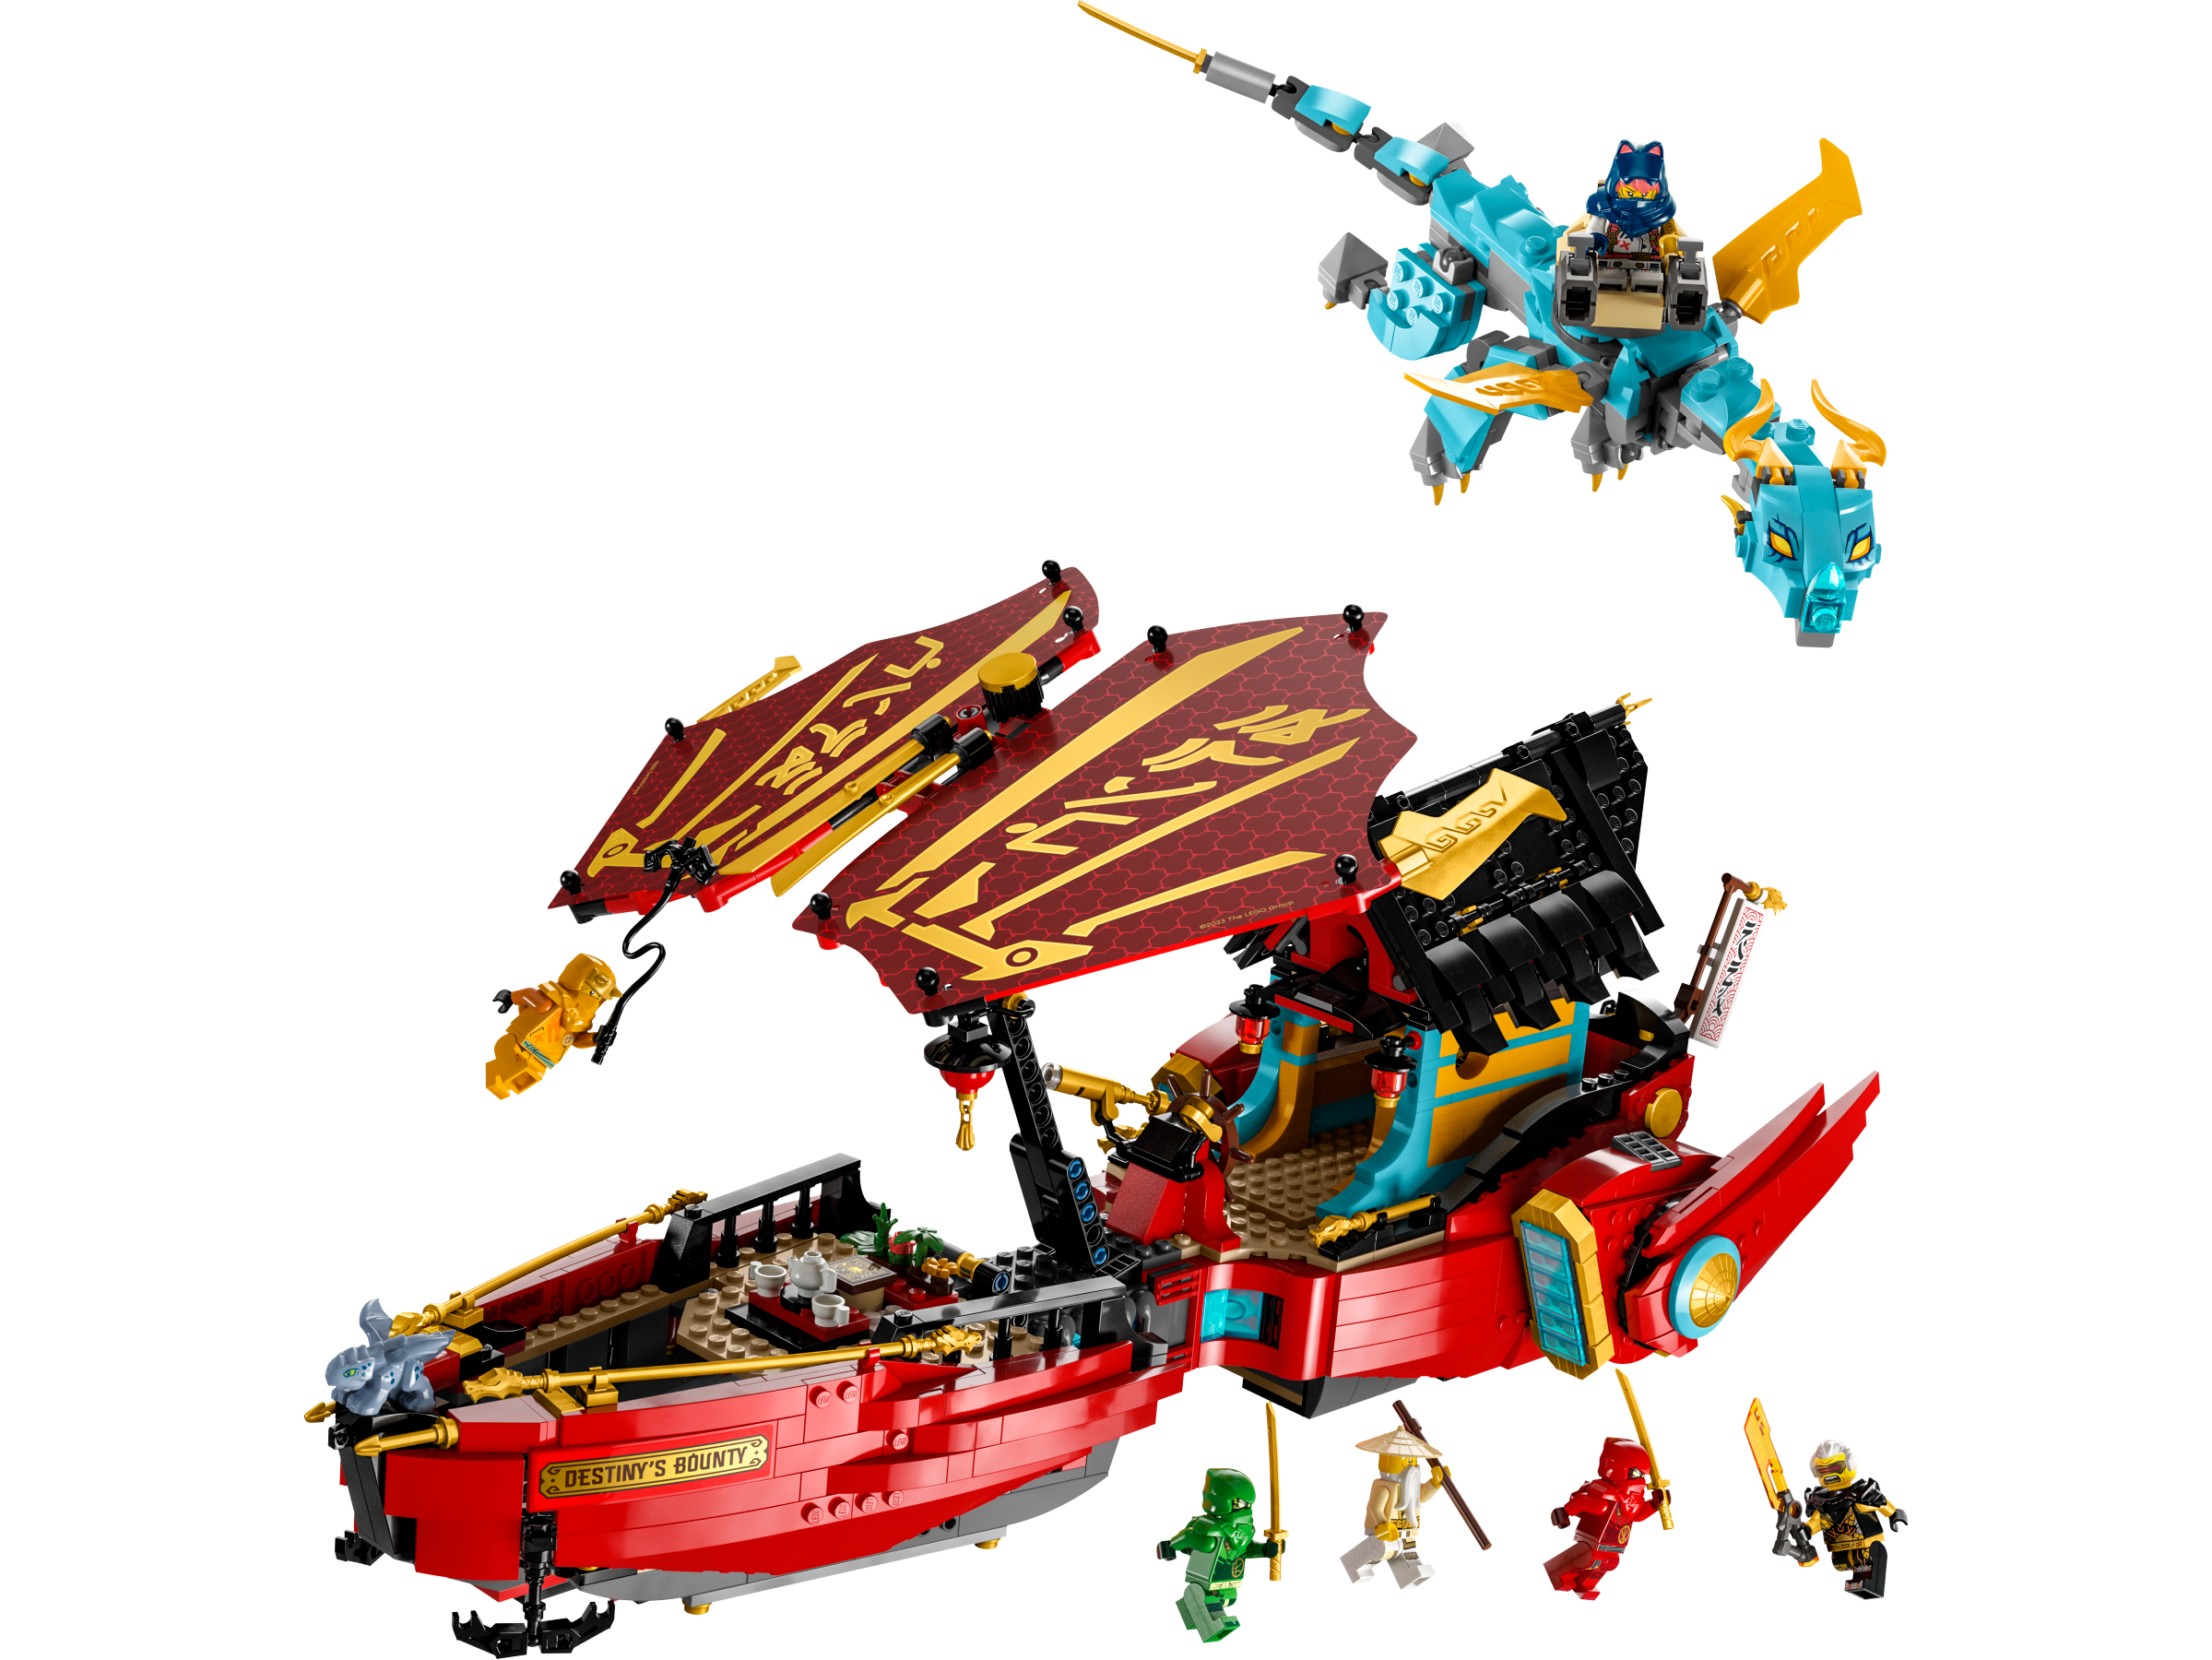 Destiny's Bounty - Race Against Time 71797 | NINJAGO® | at the Official LEGO® Shop US